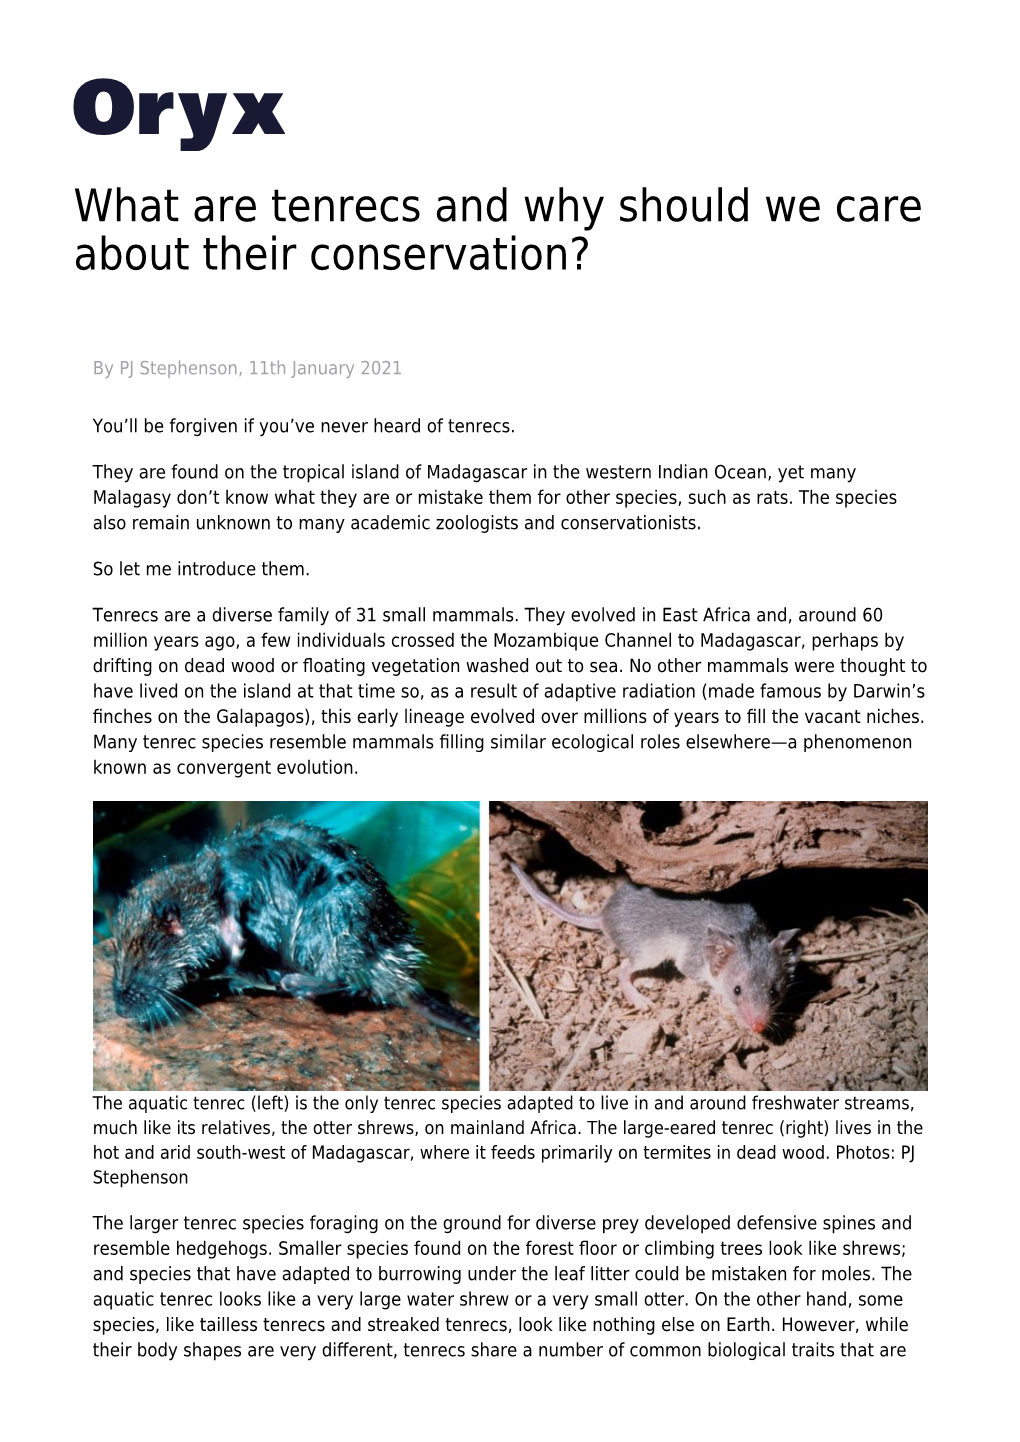 What Are Tenrecs and Why Should We Care About Their Conservation?